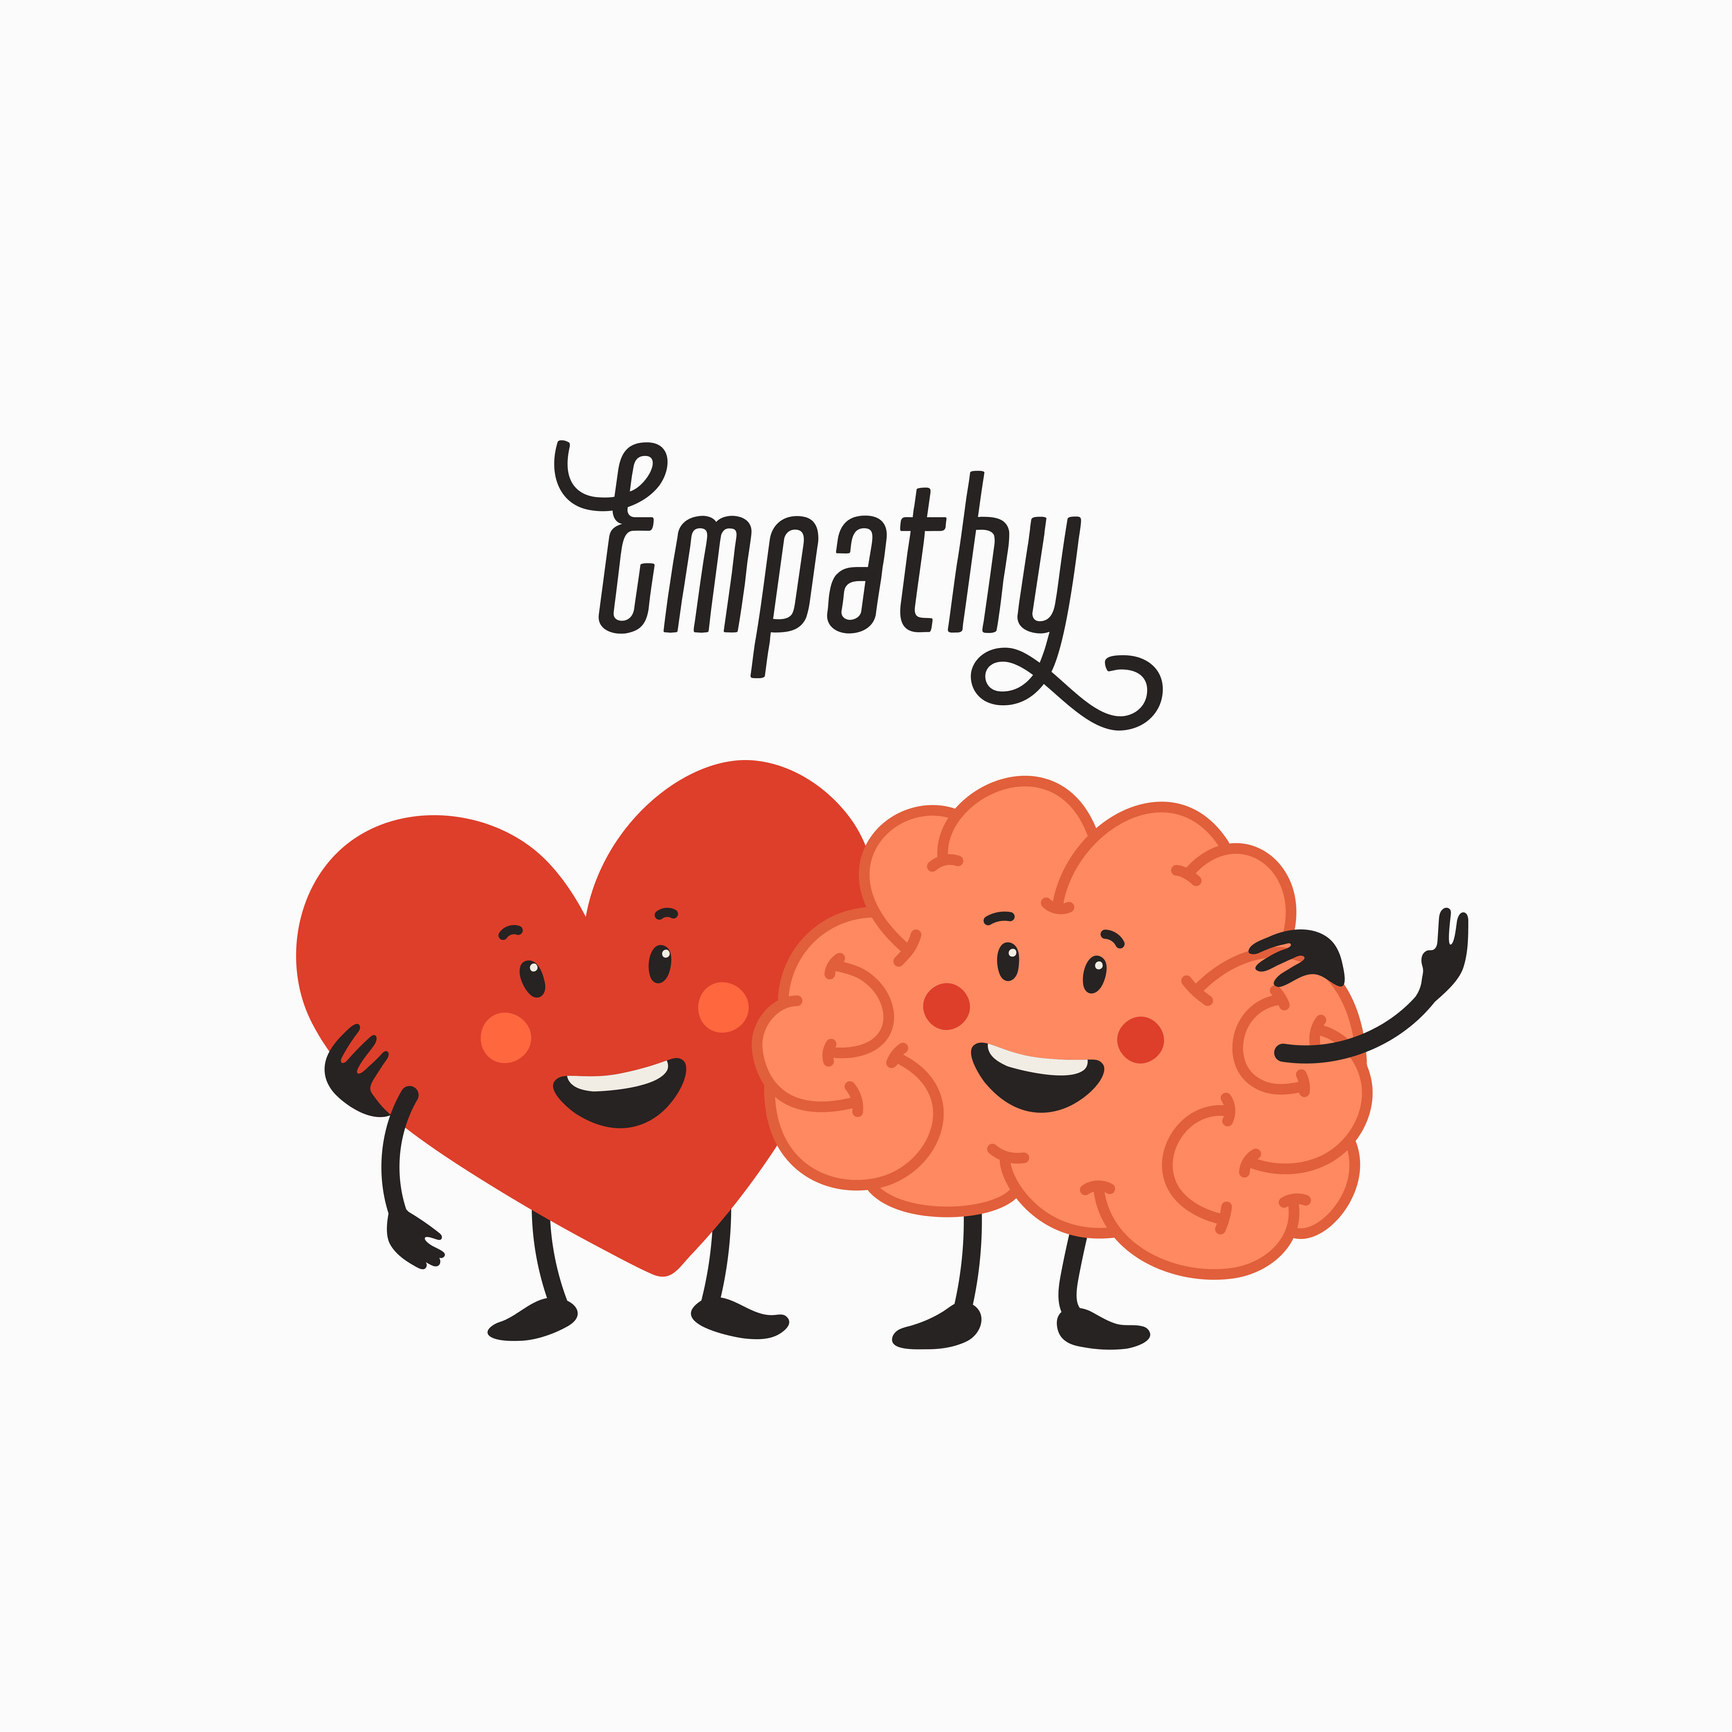 Vector illustration in flat cartoon style on white background of a heart and brain holding each other